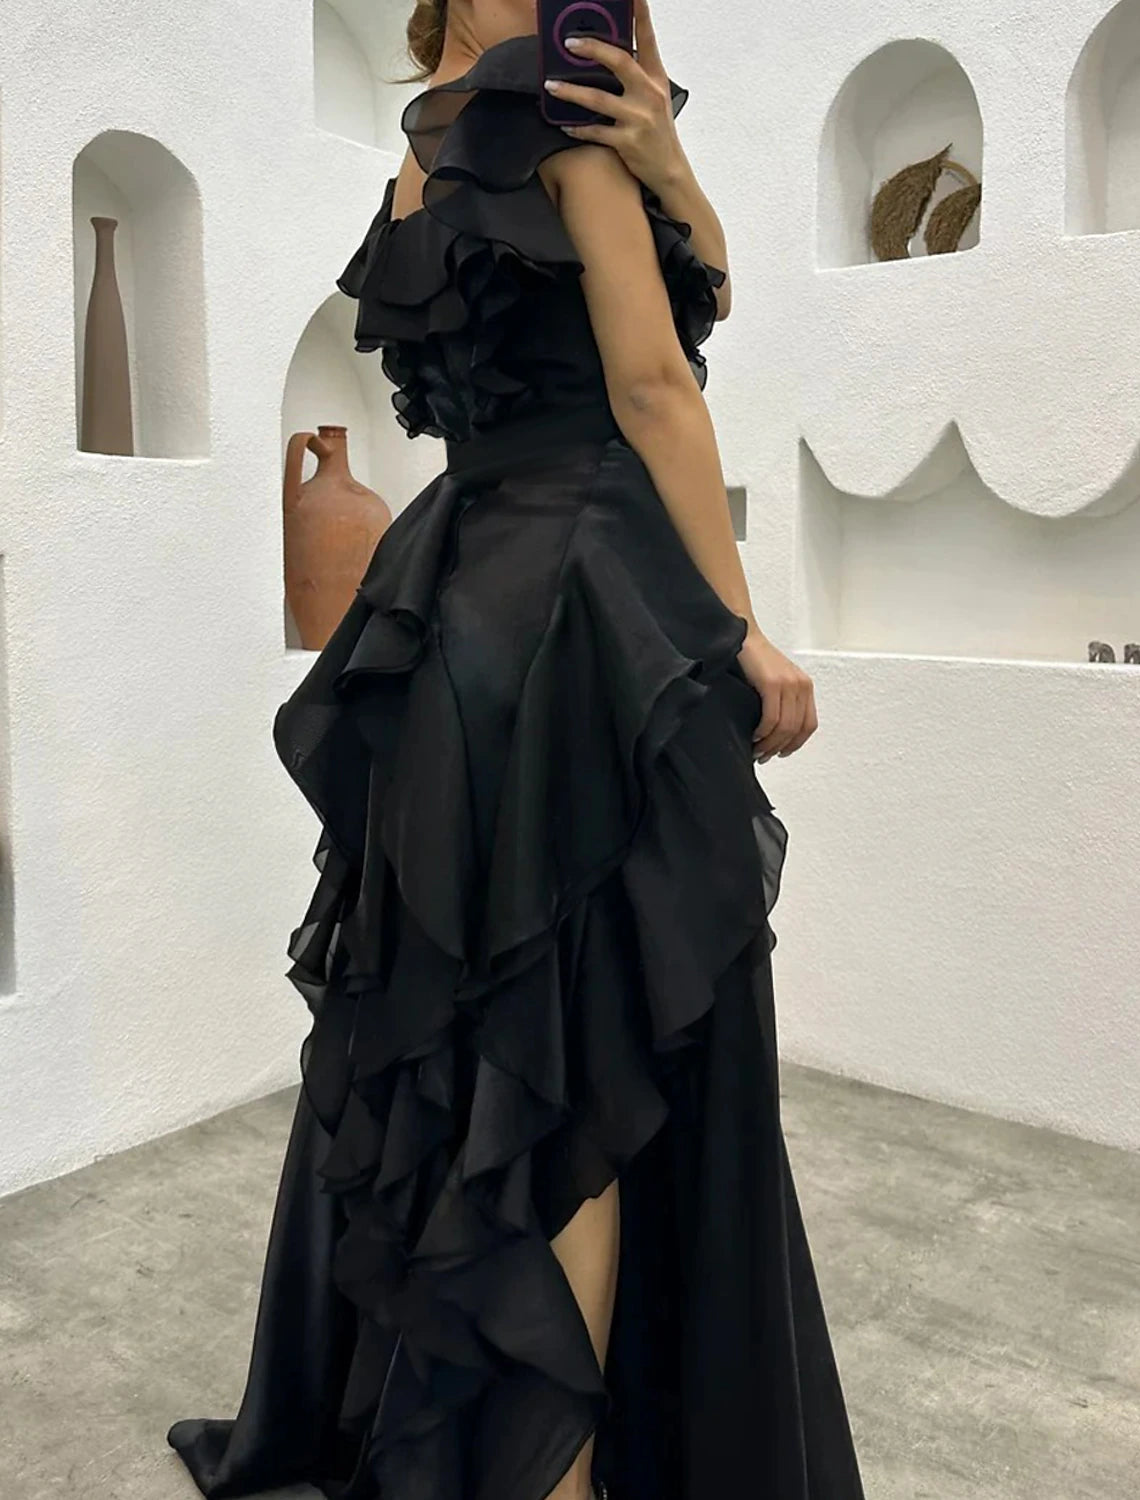 A-Line Evening Dress Black Dress Tiered Plisse Dress Formal Masquerade Sweep / Brush Train Sleeveless Off Shoulder Gothic Chiffon with Ruffles